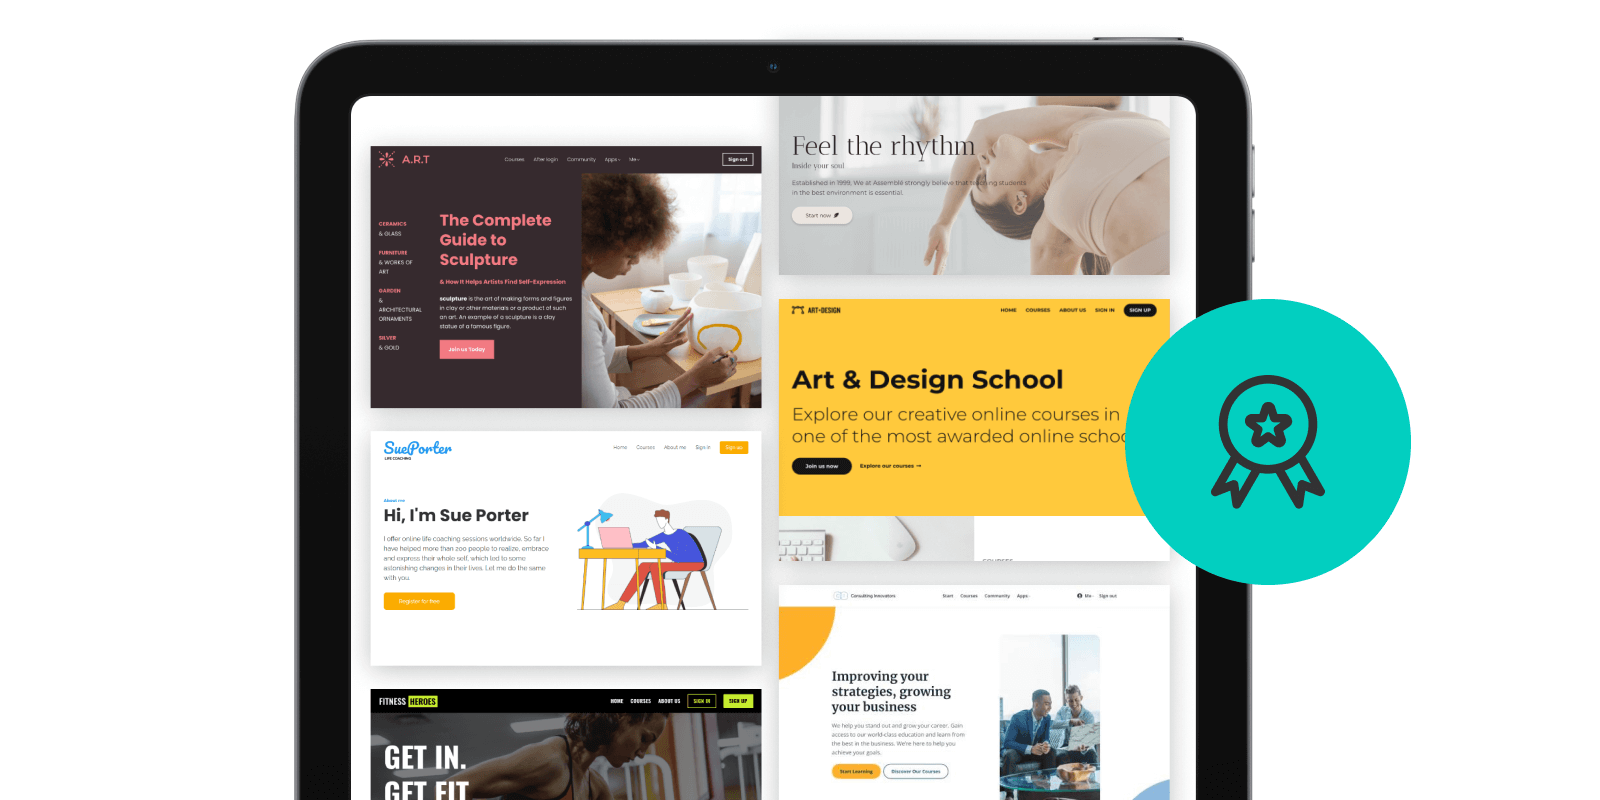 The best online course landing pages, in this image you can see an example of a landing page with different zones inside a tablet format.